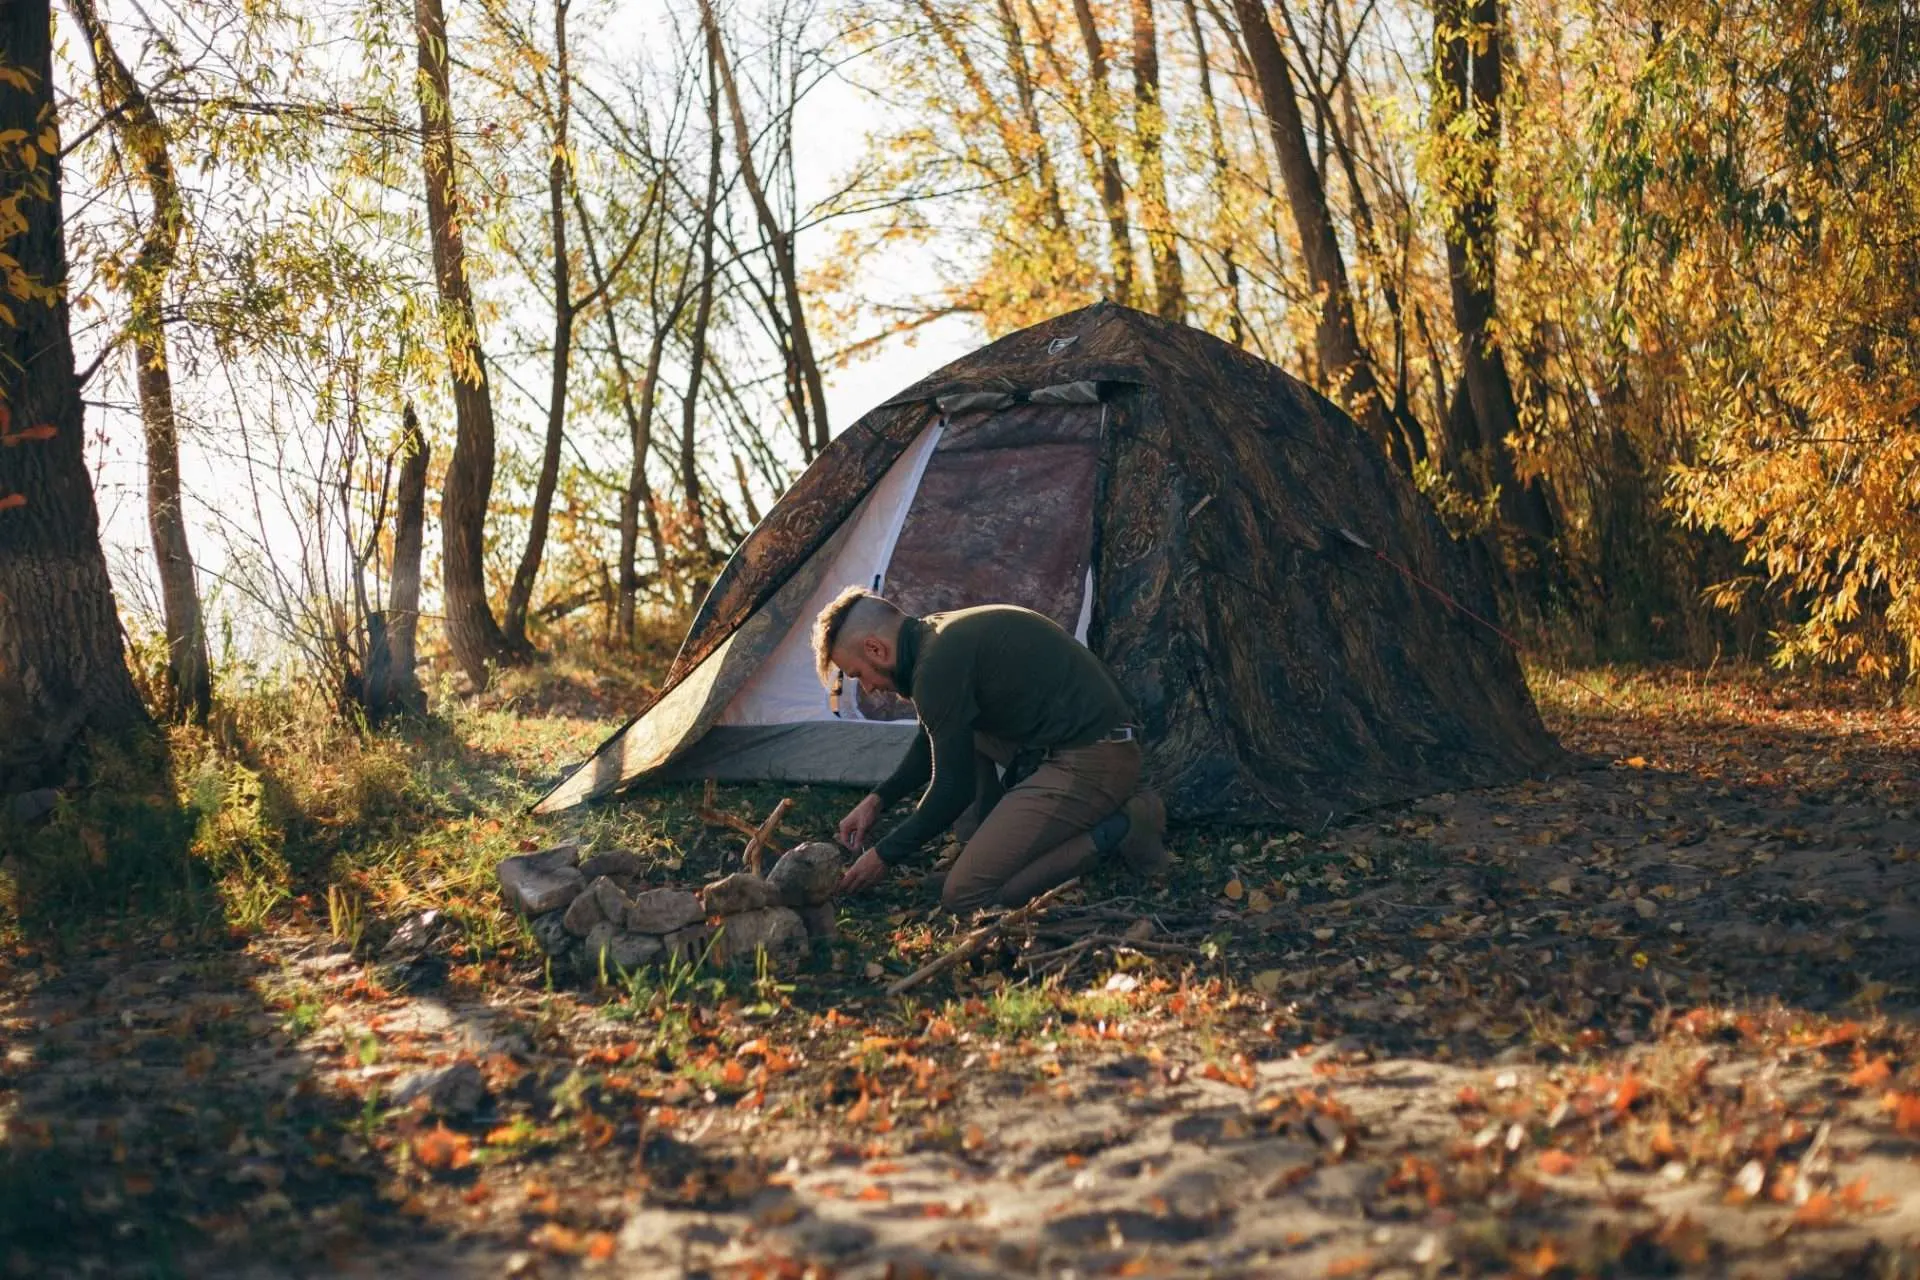 Man setting up camp site in forest.